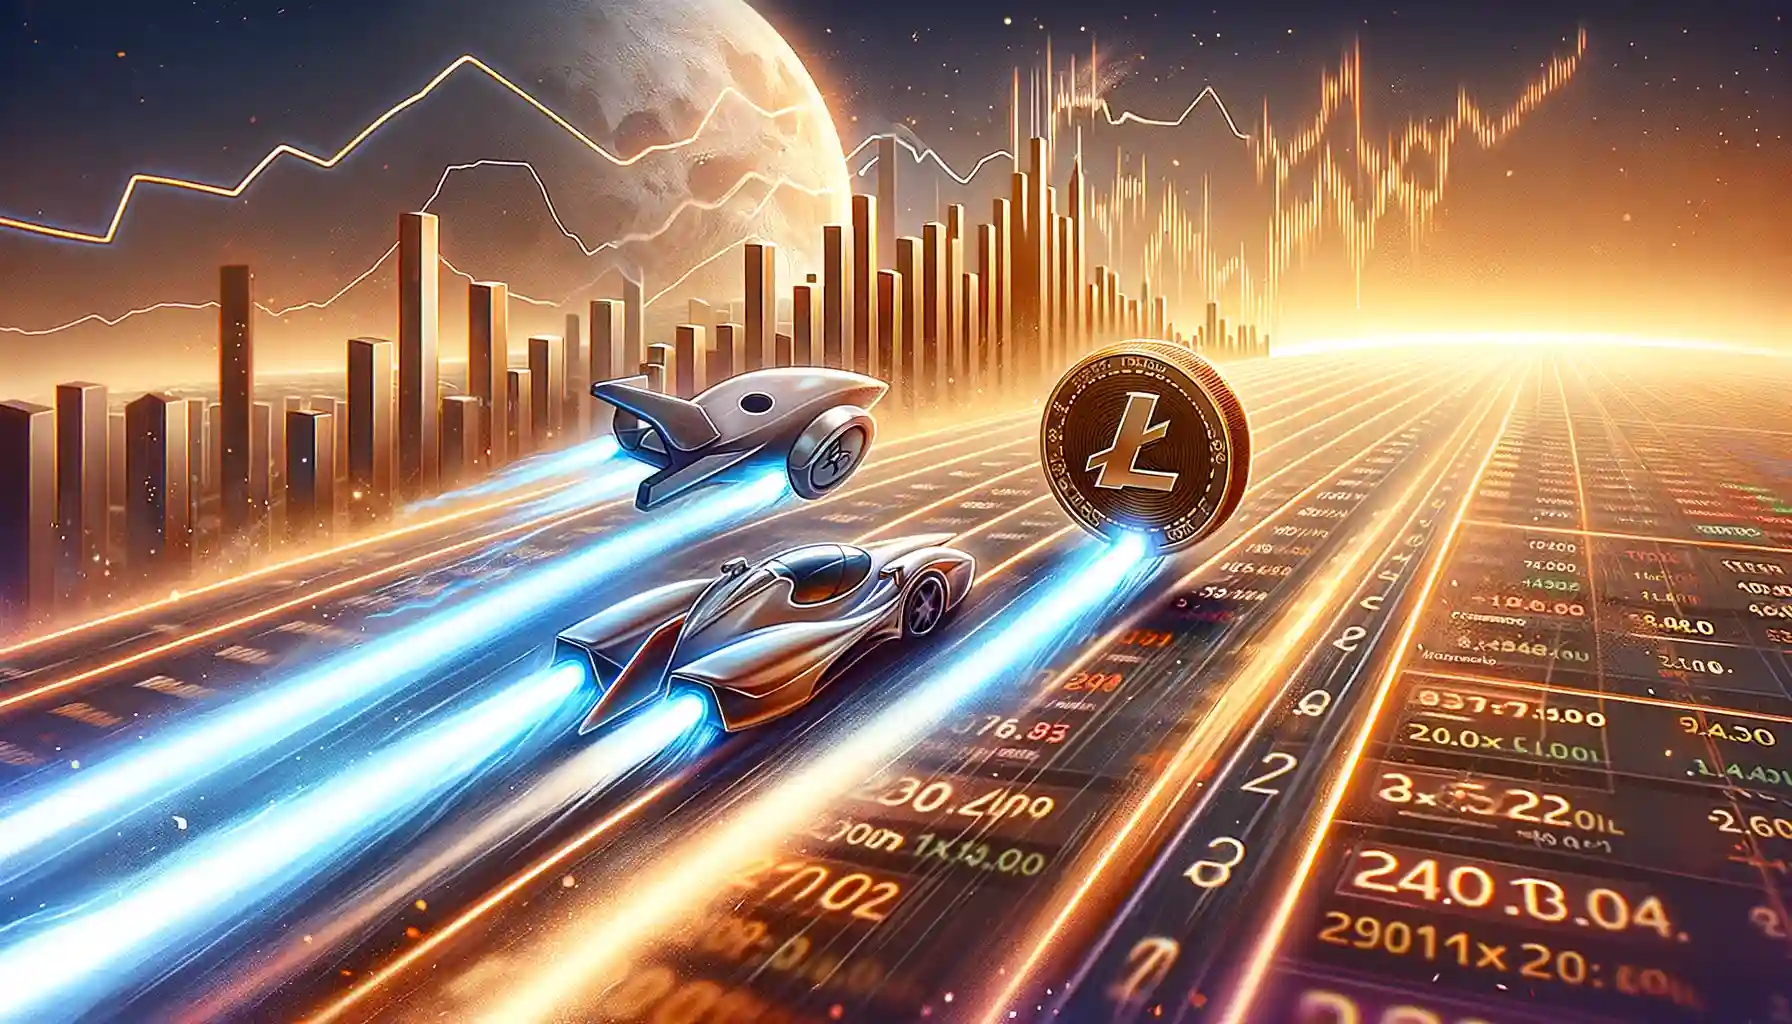 Altcoin surge: XRP and Litecoin's meteoric rise and the battle to sustain momentum